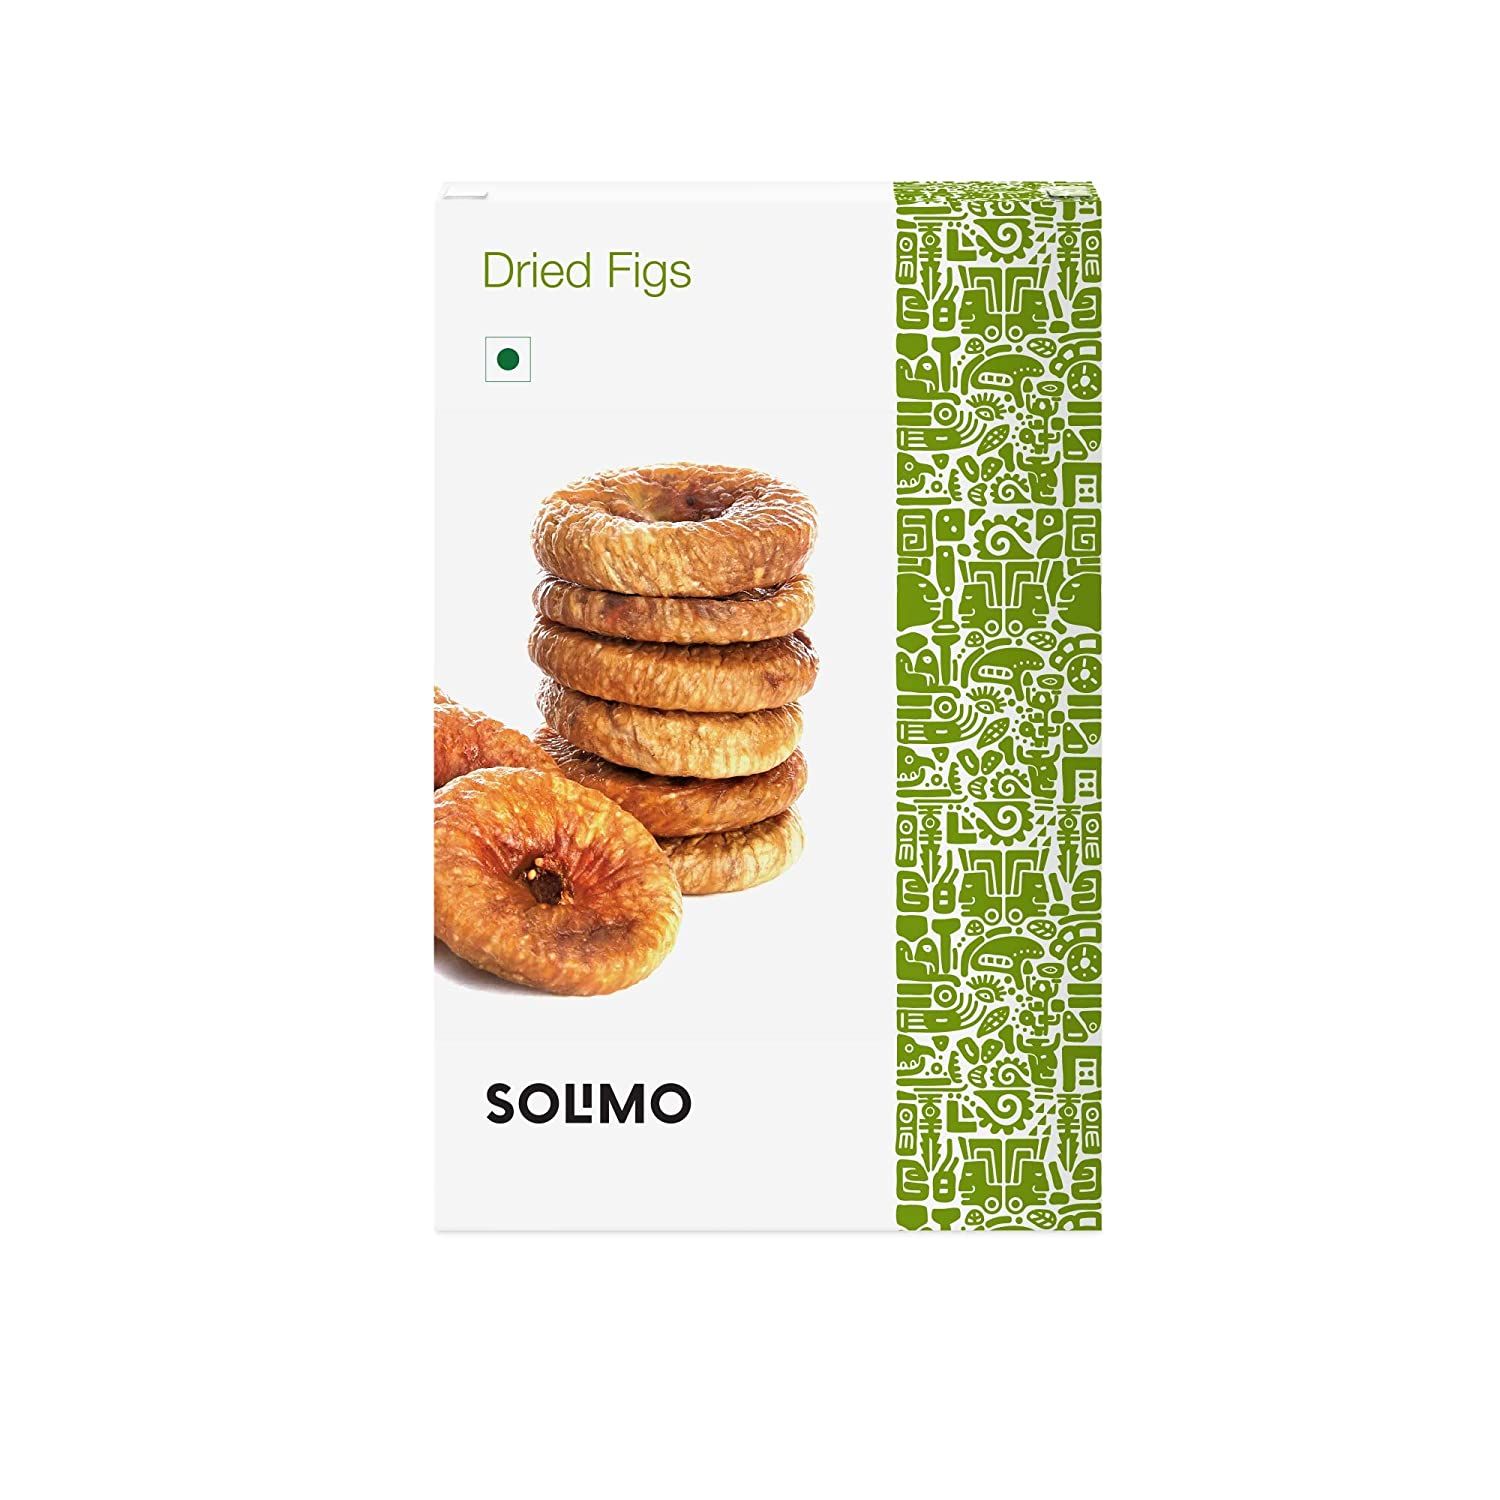 Solimo Dried Figs Image